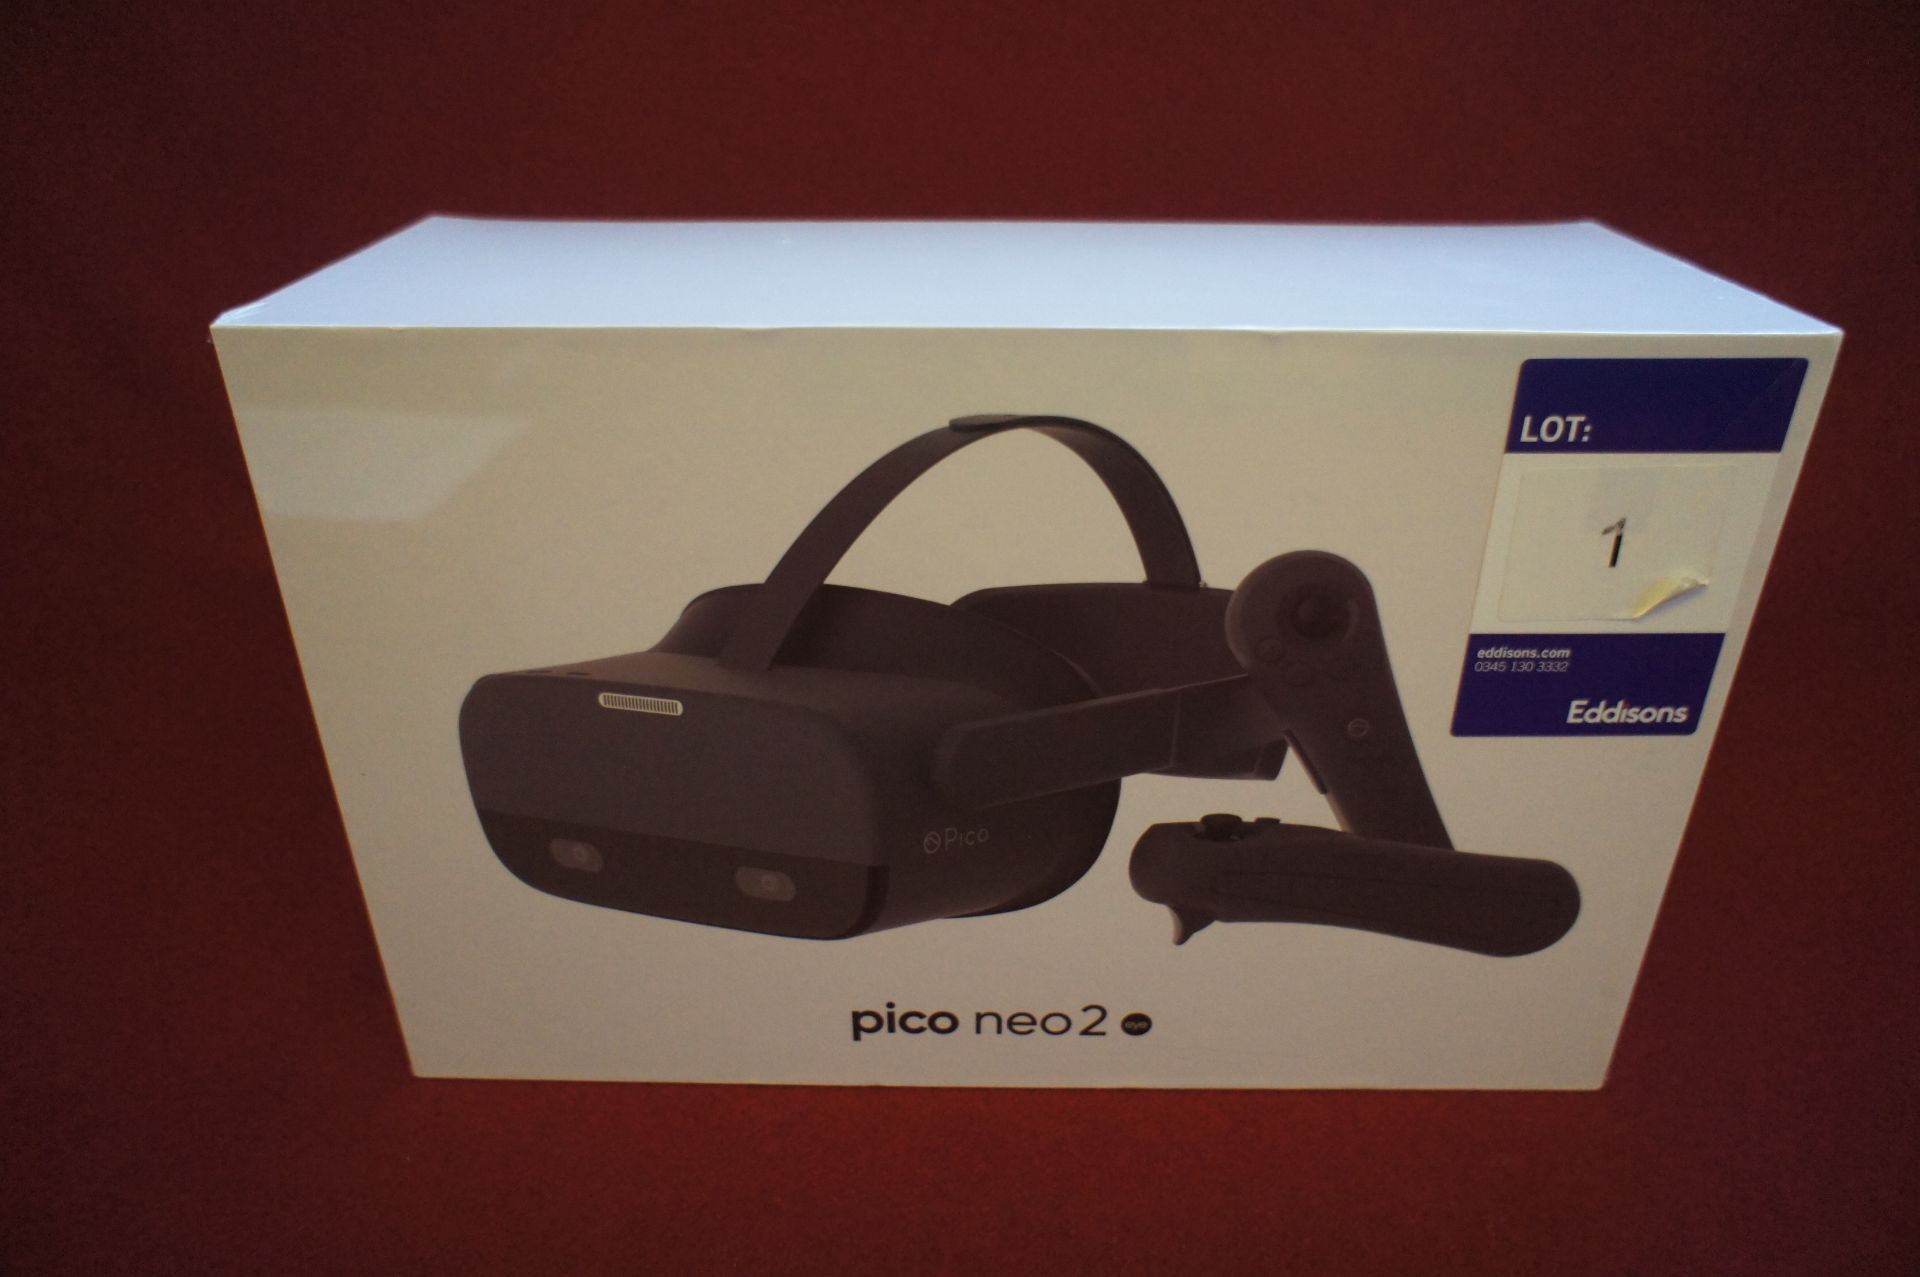 Pico Neo 2 EYE VR headset, Asset Number F8, S/N PA